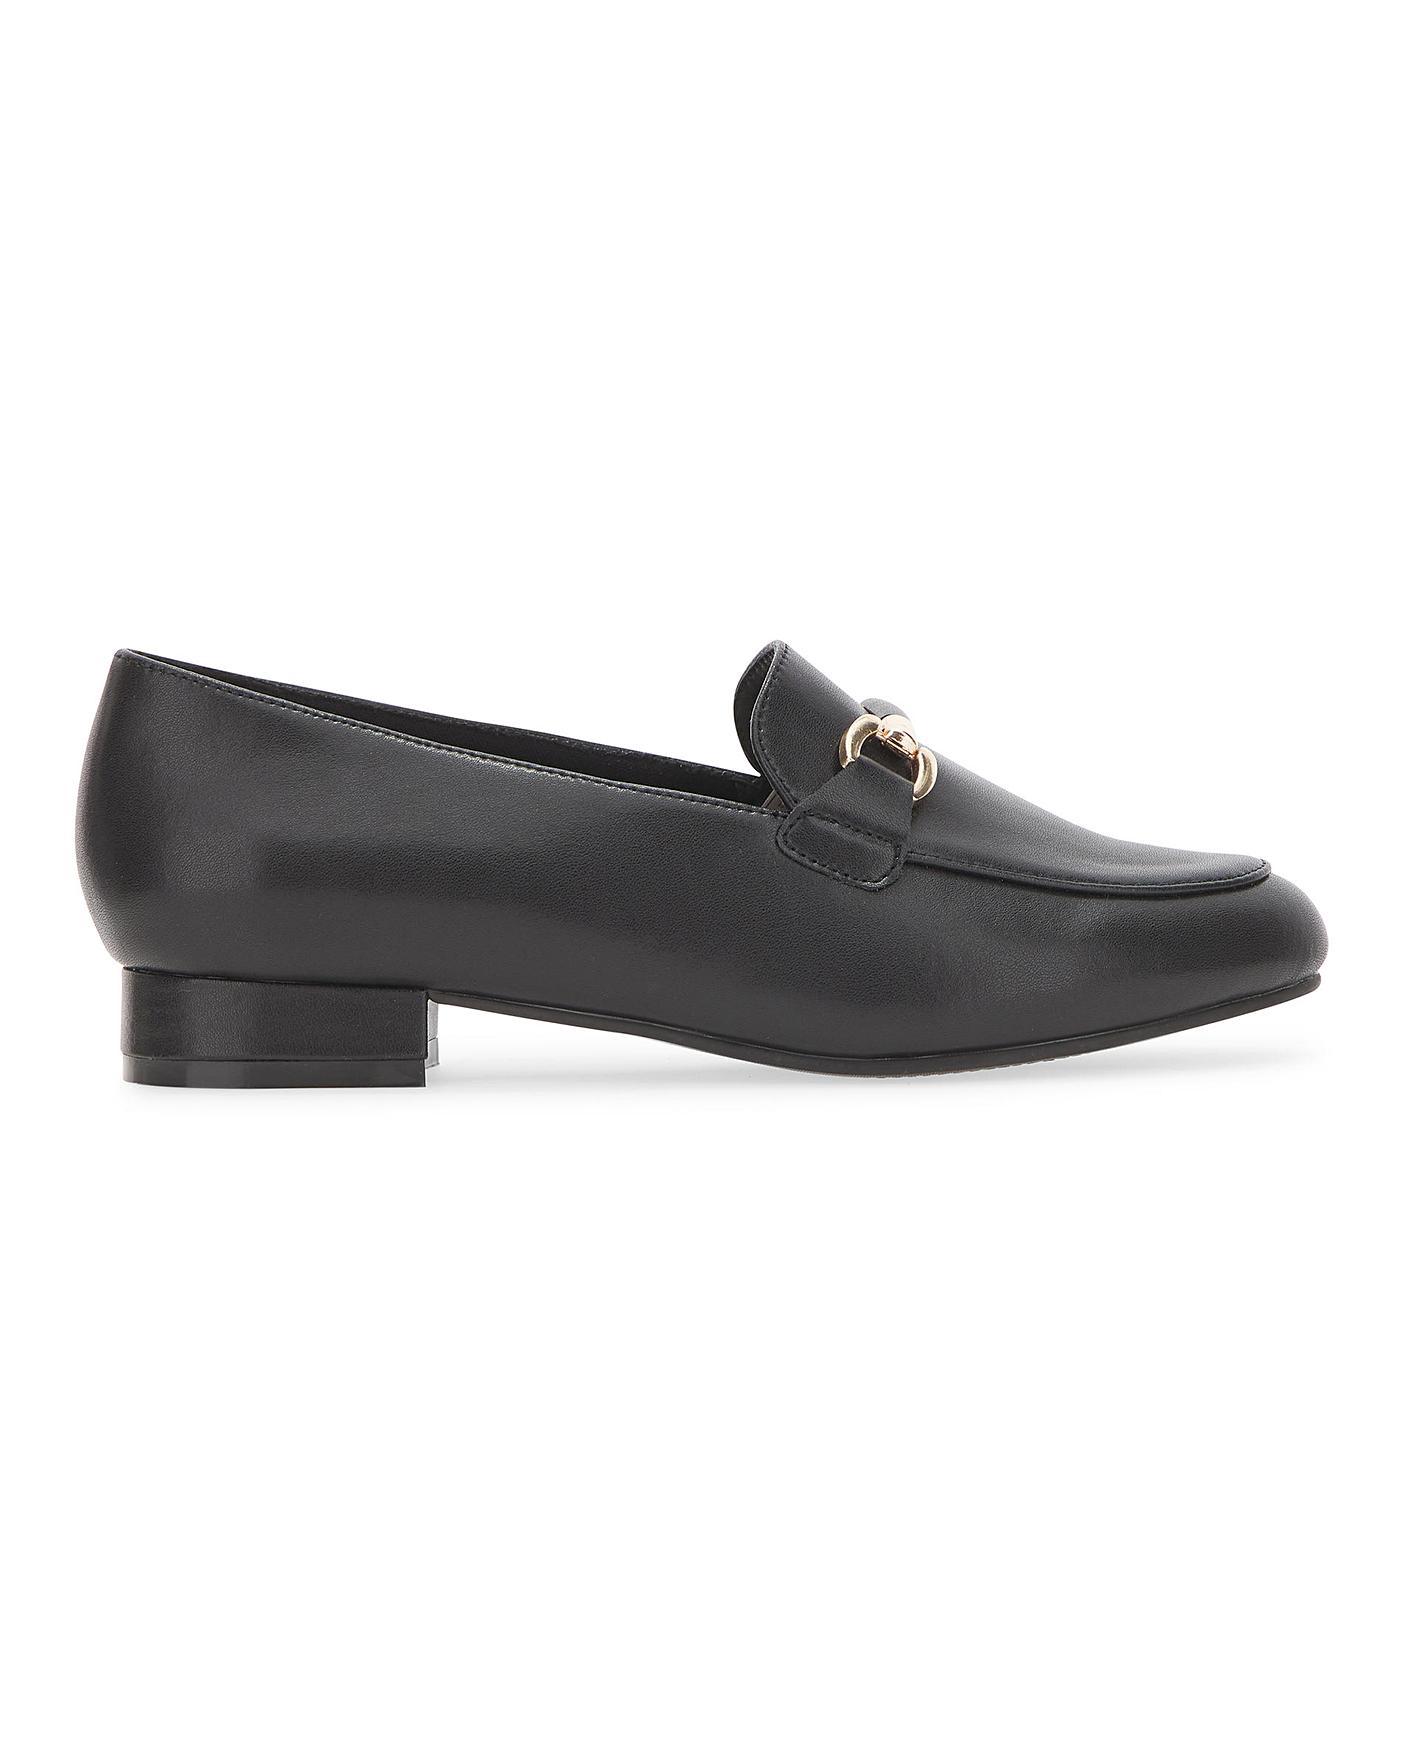 Leather Trim Loafer on Flexi Sole E Fit | J D Williams